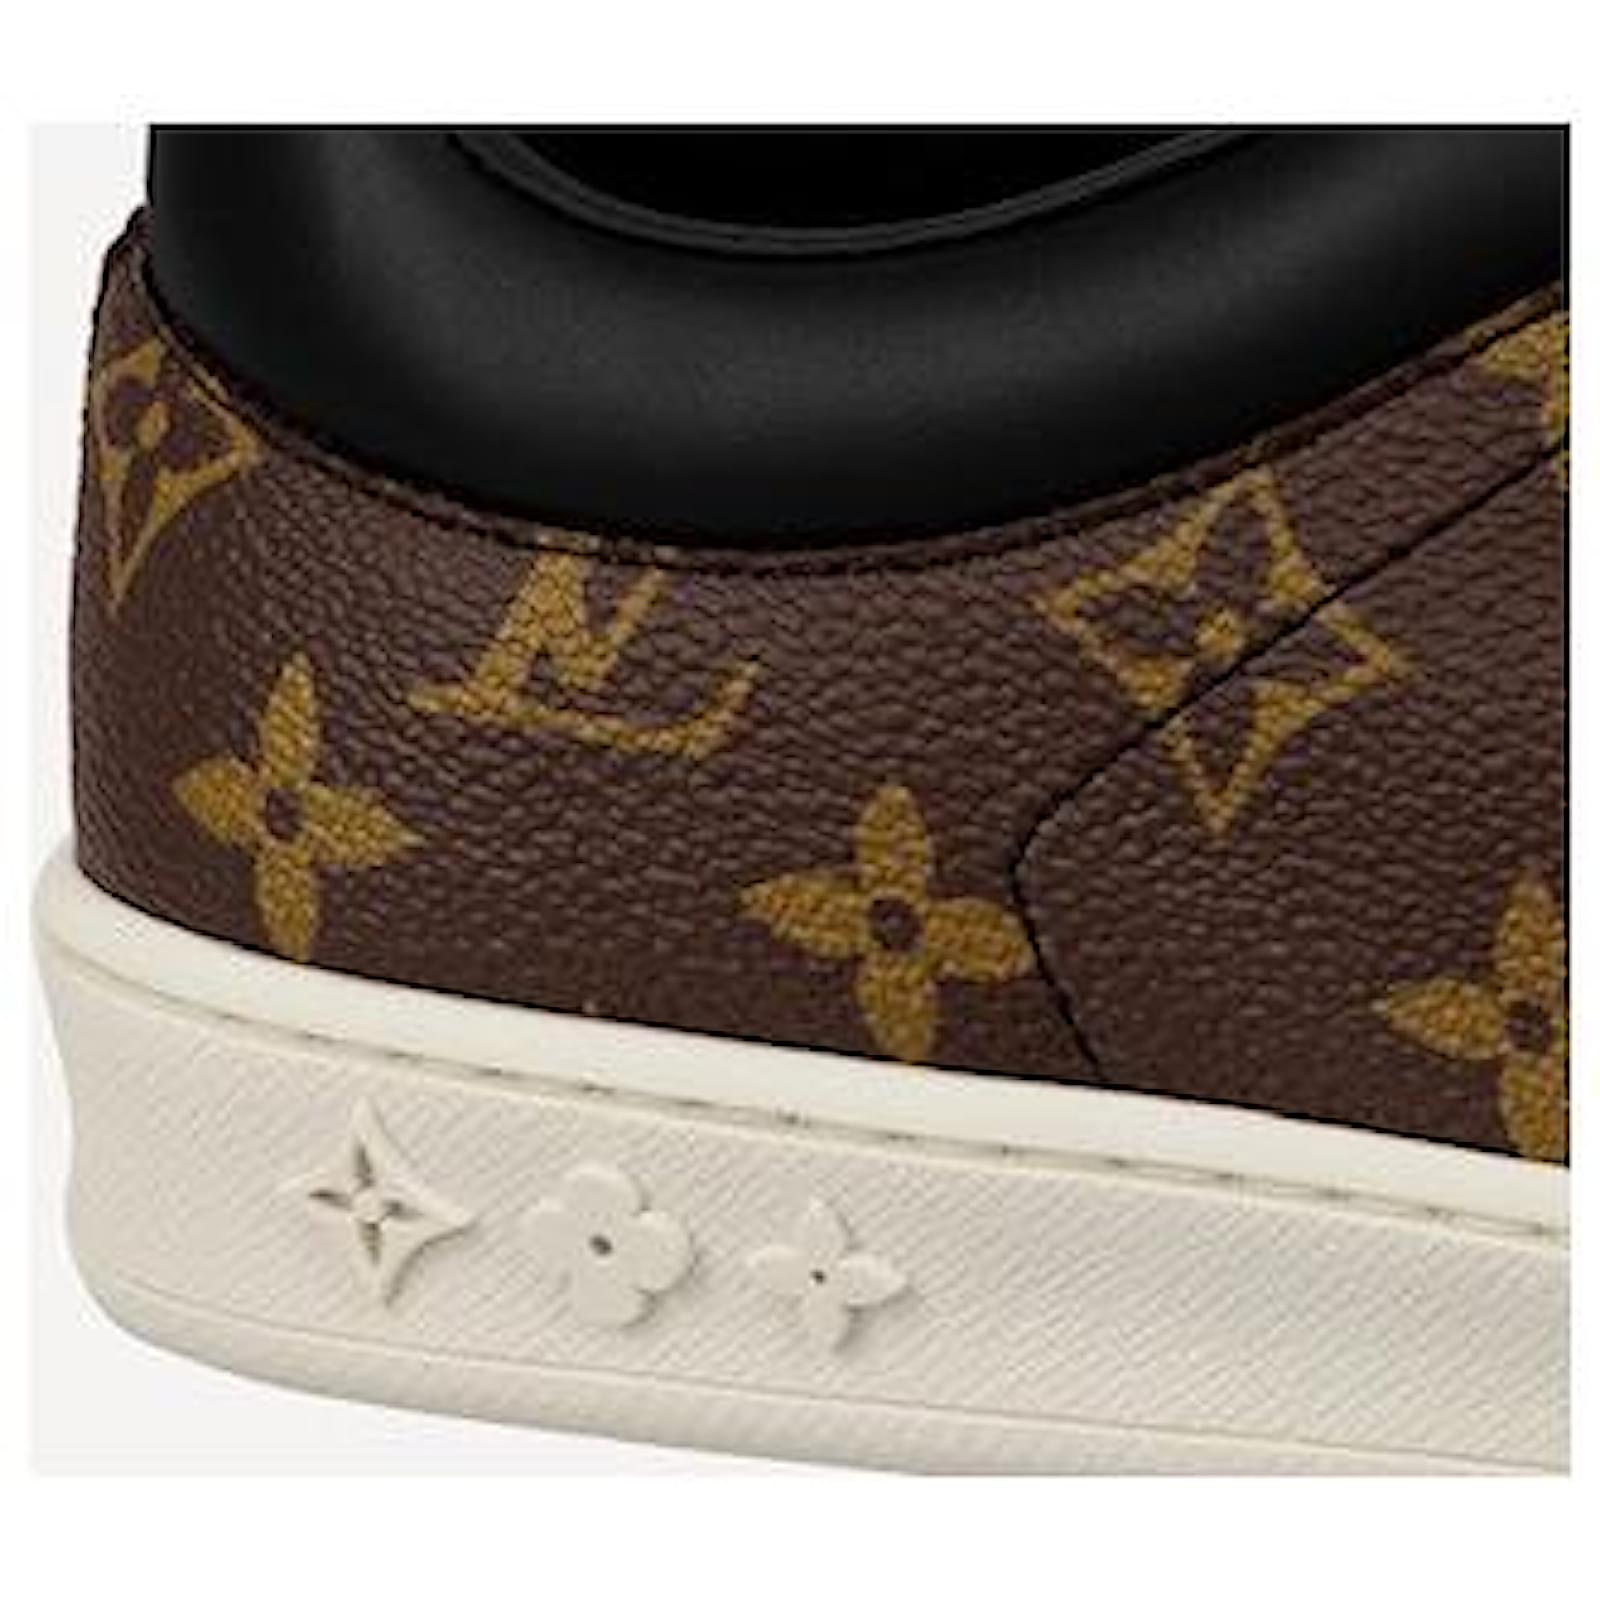 Sneakers Louis Vuitton LV Luxembourg Trainers New